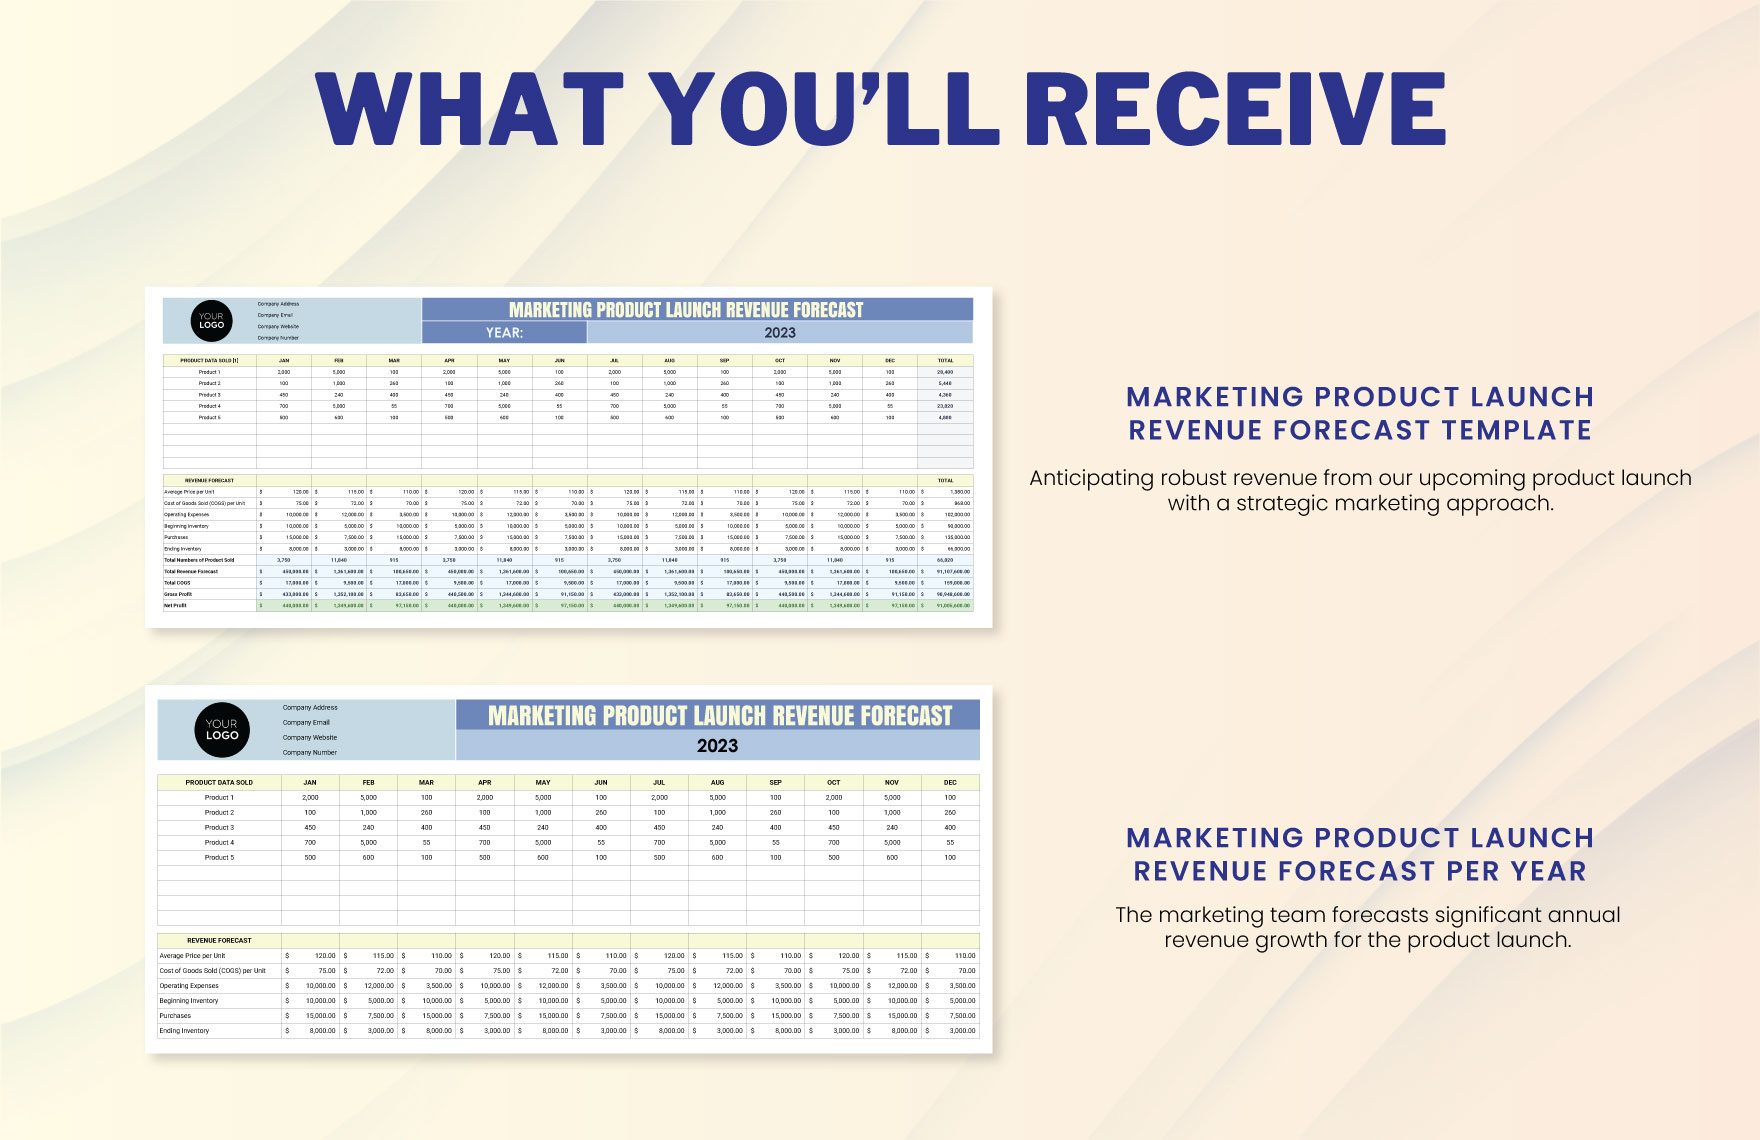 Marketing Product Launch Revenue Forecast Template